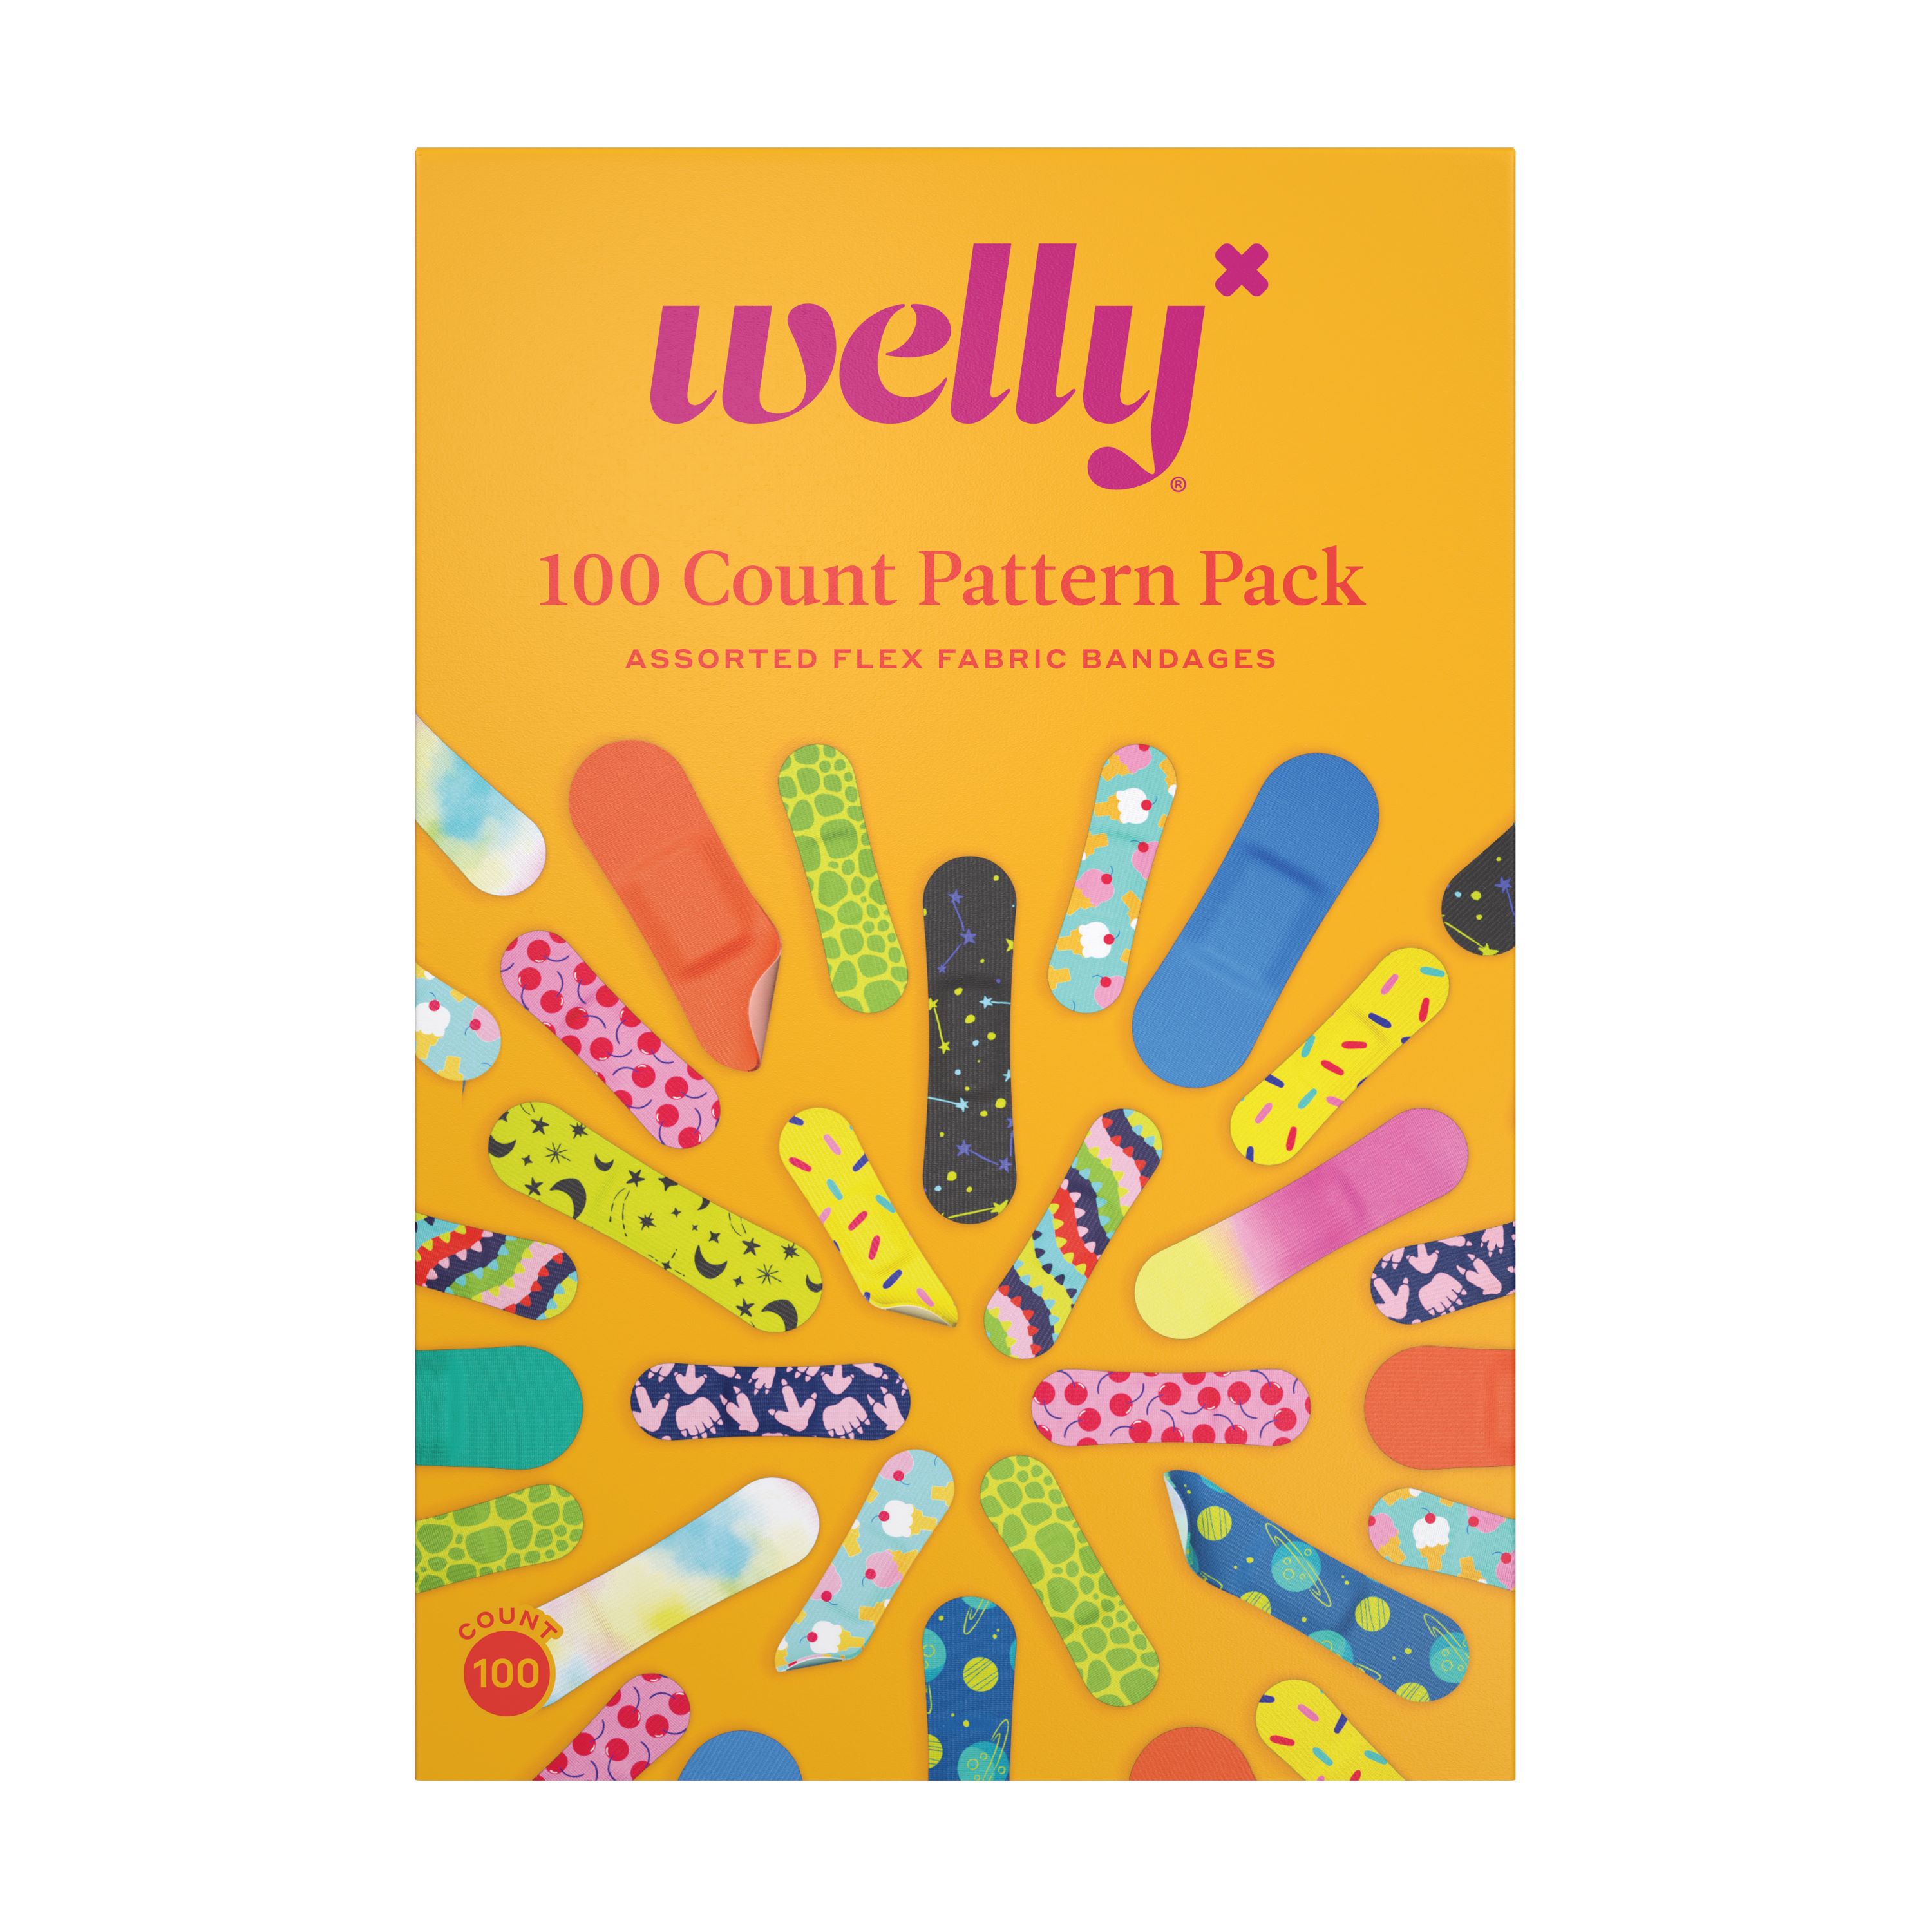 Welly Bravery Bandages Assorted Flex Fabric Pattern Pack, 100 Ct , CVS